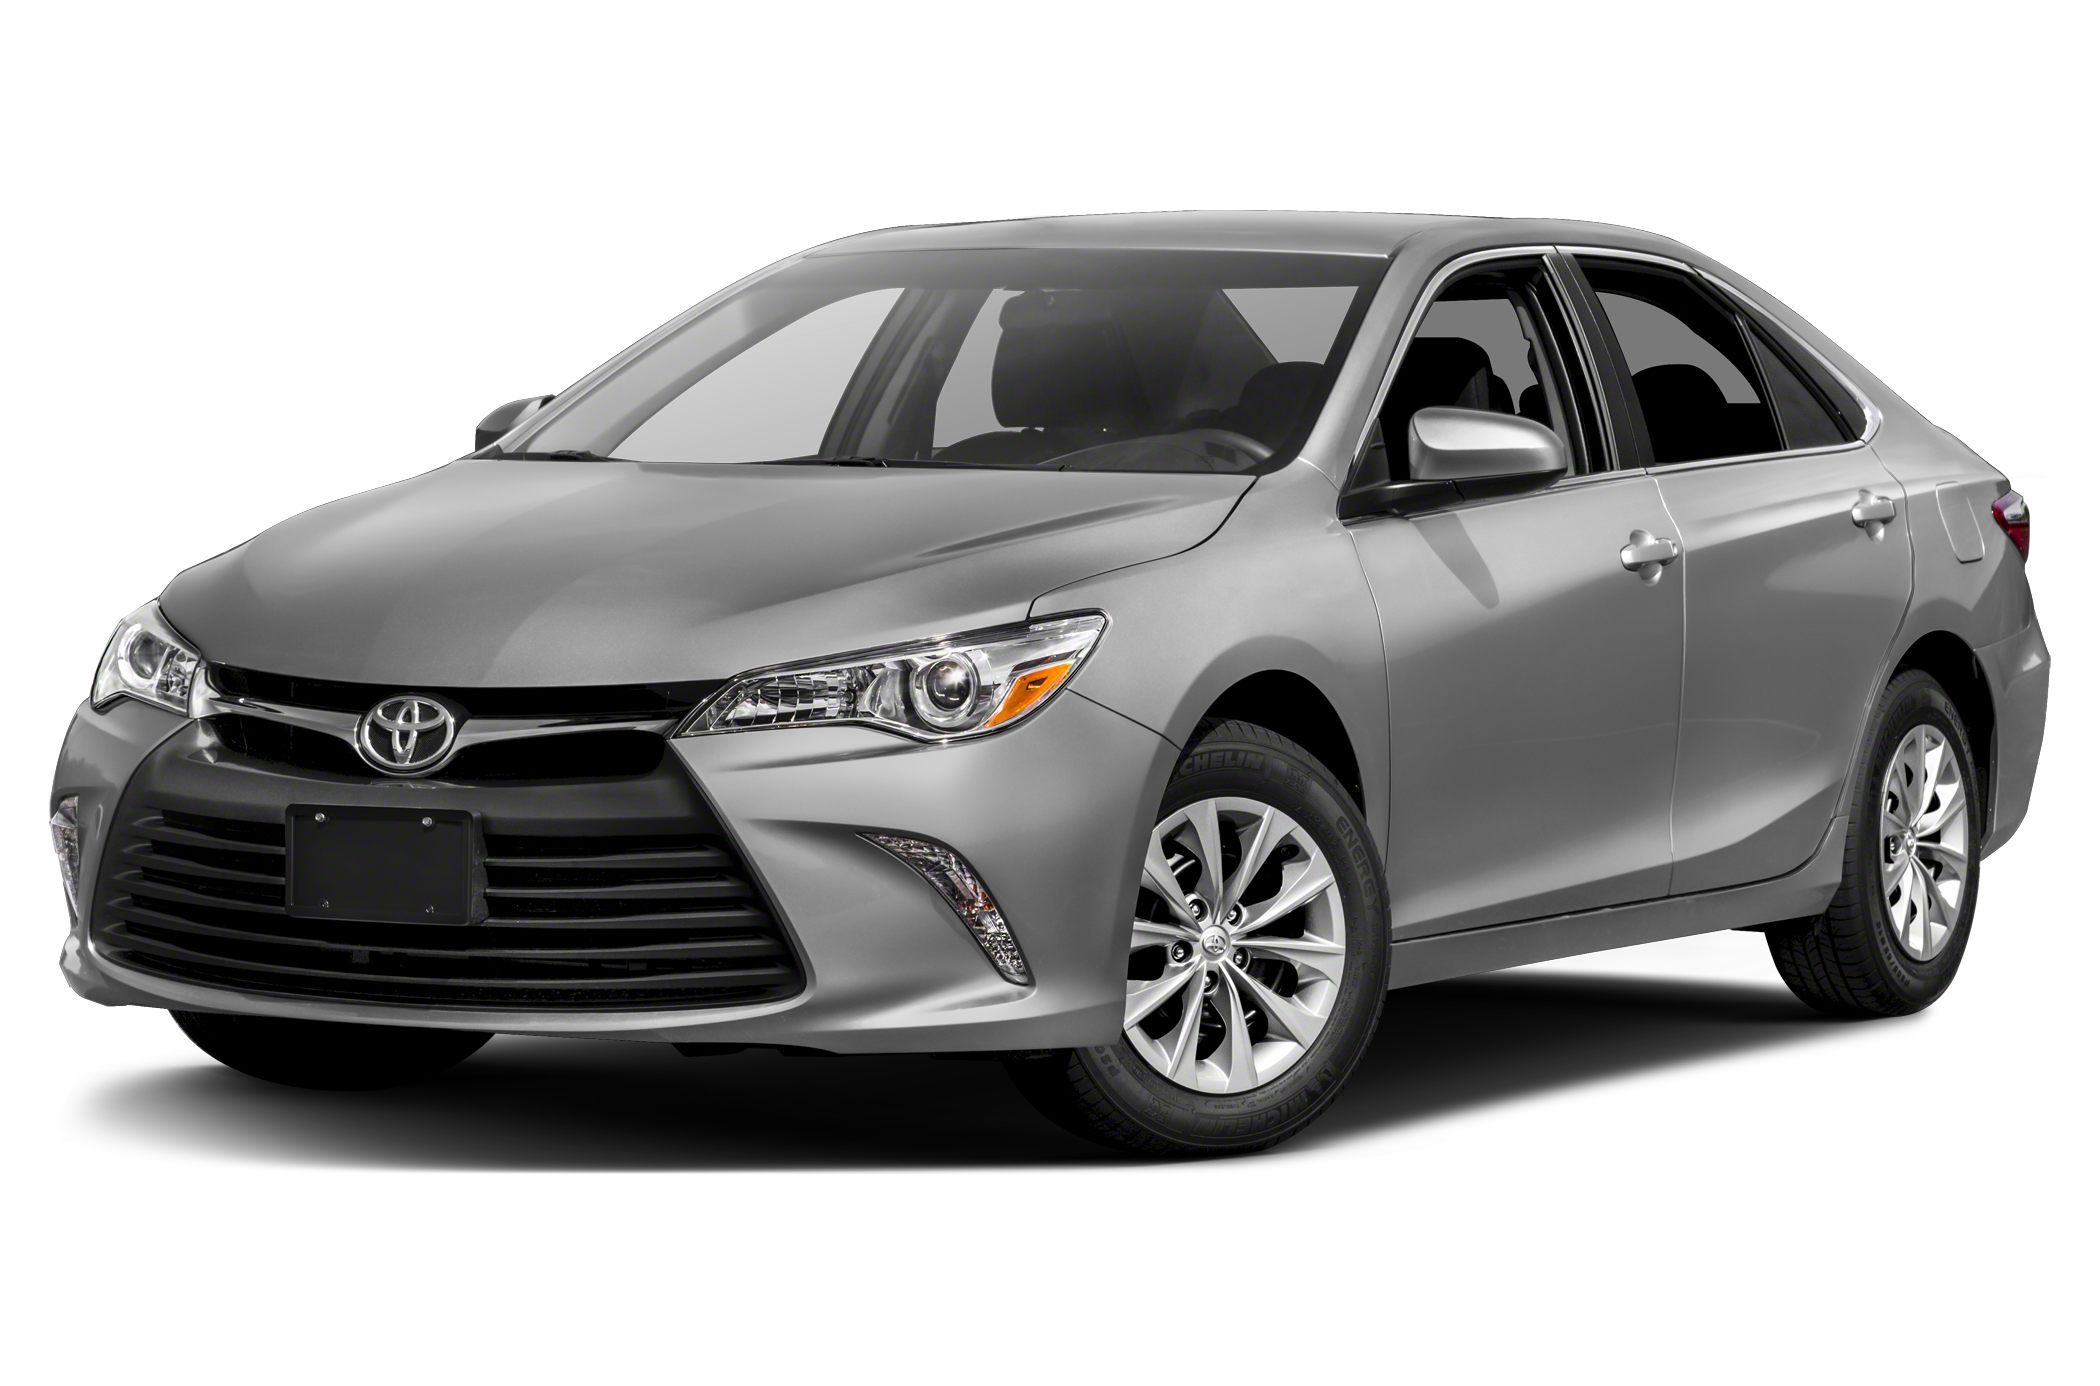 2017 Toyota Camry oem parts and accessories on sale